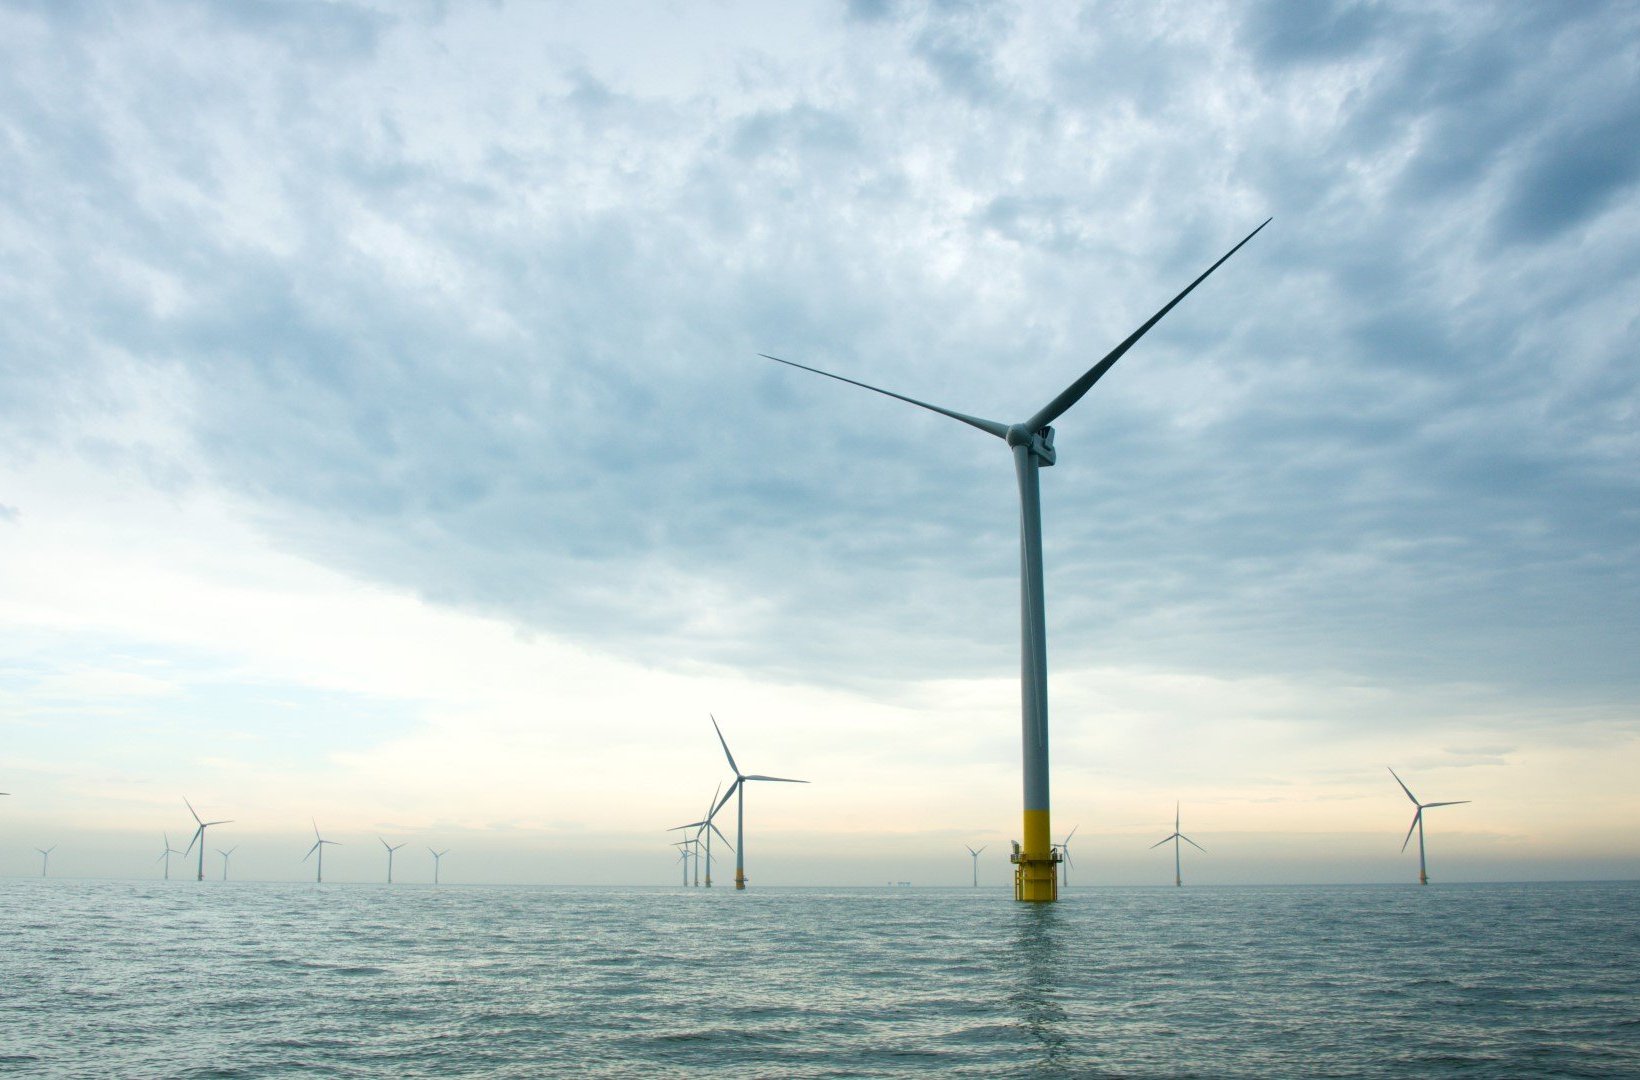 Image of an offshore wind farm